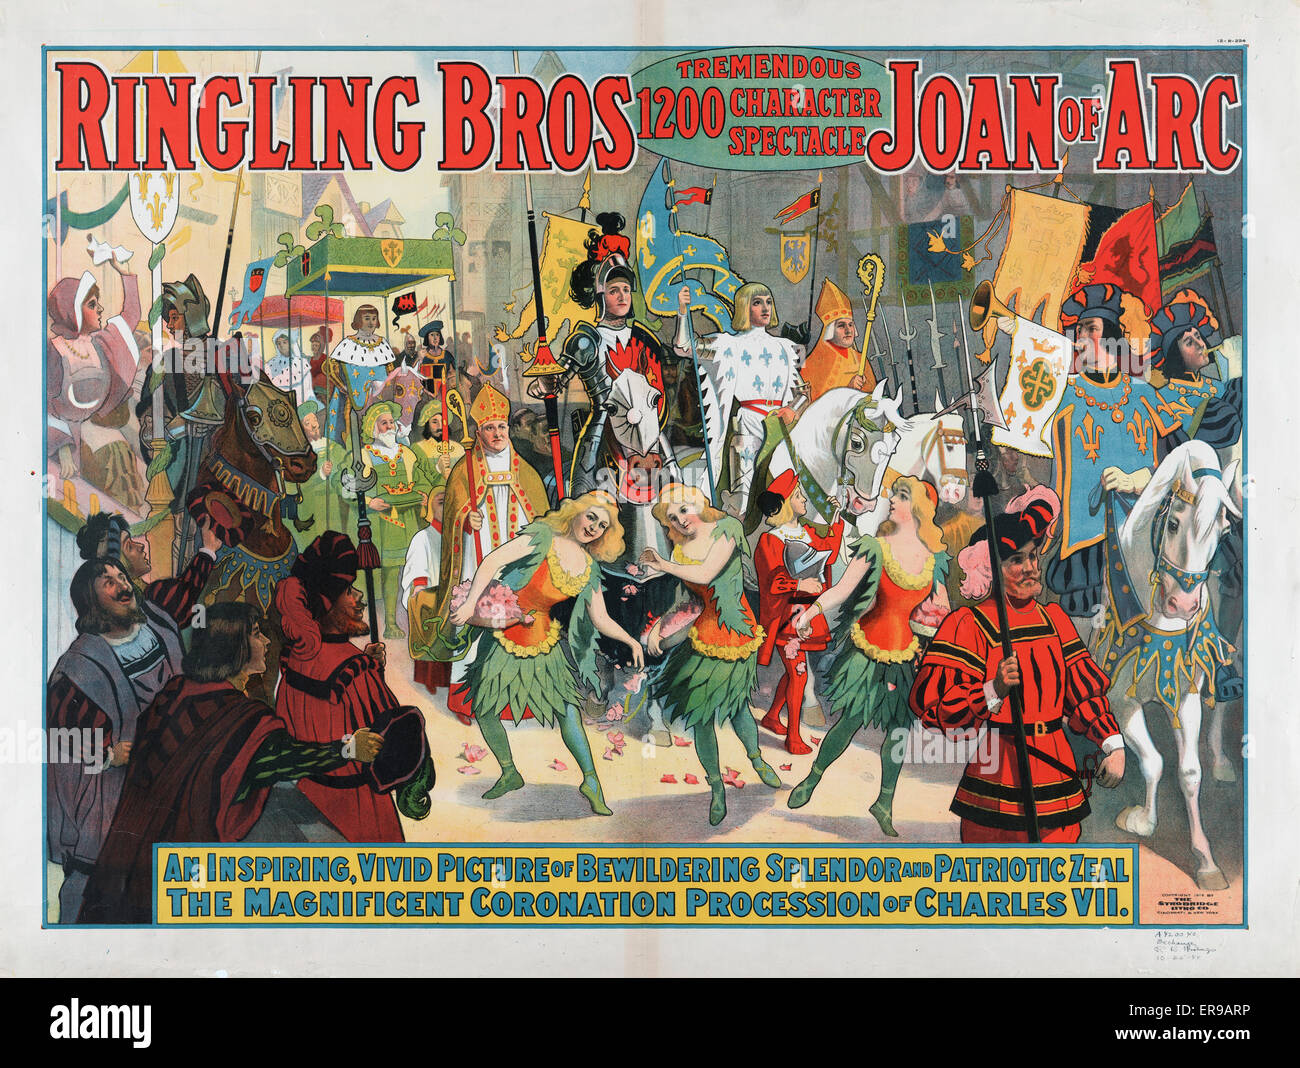 Ringling Bros. tremendous 1200 character spectacle Joan of Arc - An inspiring, vivid picture  the magnificent coronation of Charles VII. Procession with King Charles VII, Joan of Arc, knights and others. Date c1912. Stock Photo